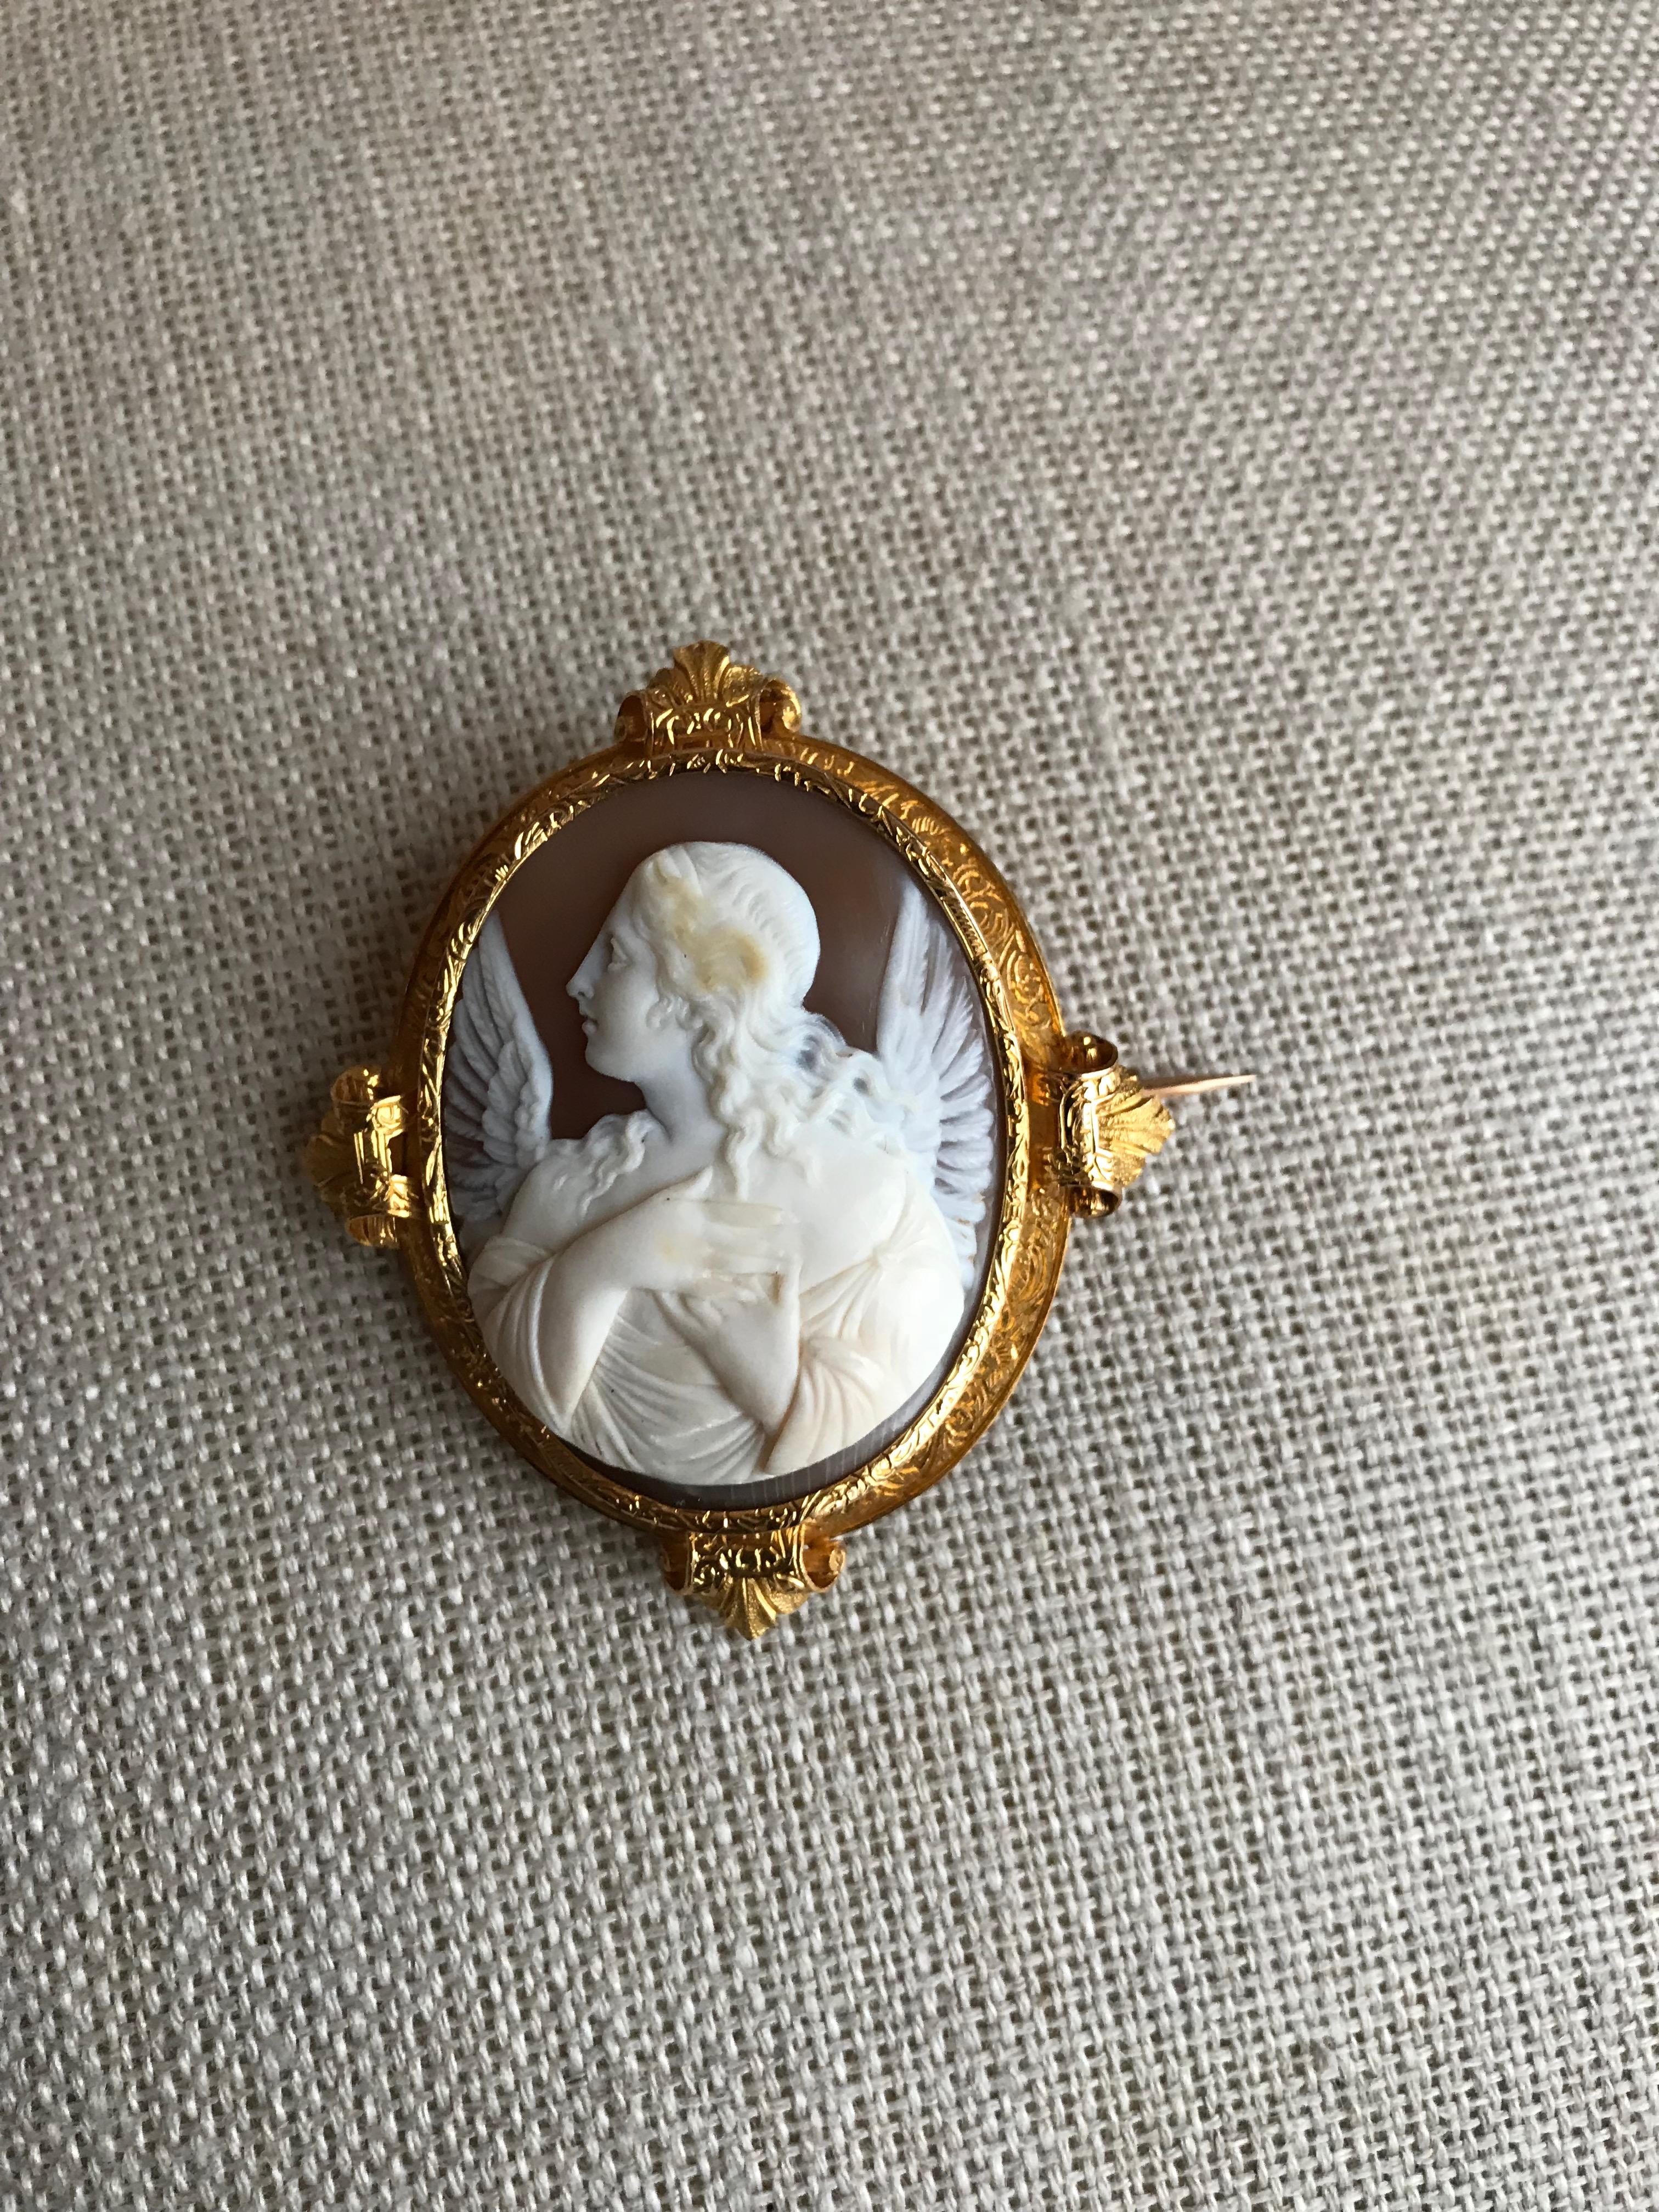  Froment-Meurice Set in 18 Carat, Yellow Gold and Cameo, 19th Century 5